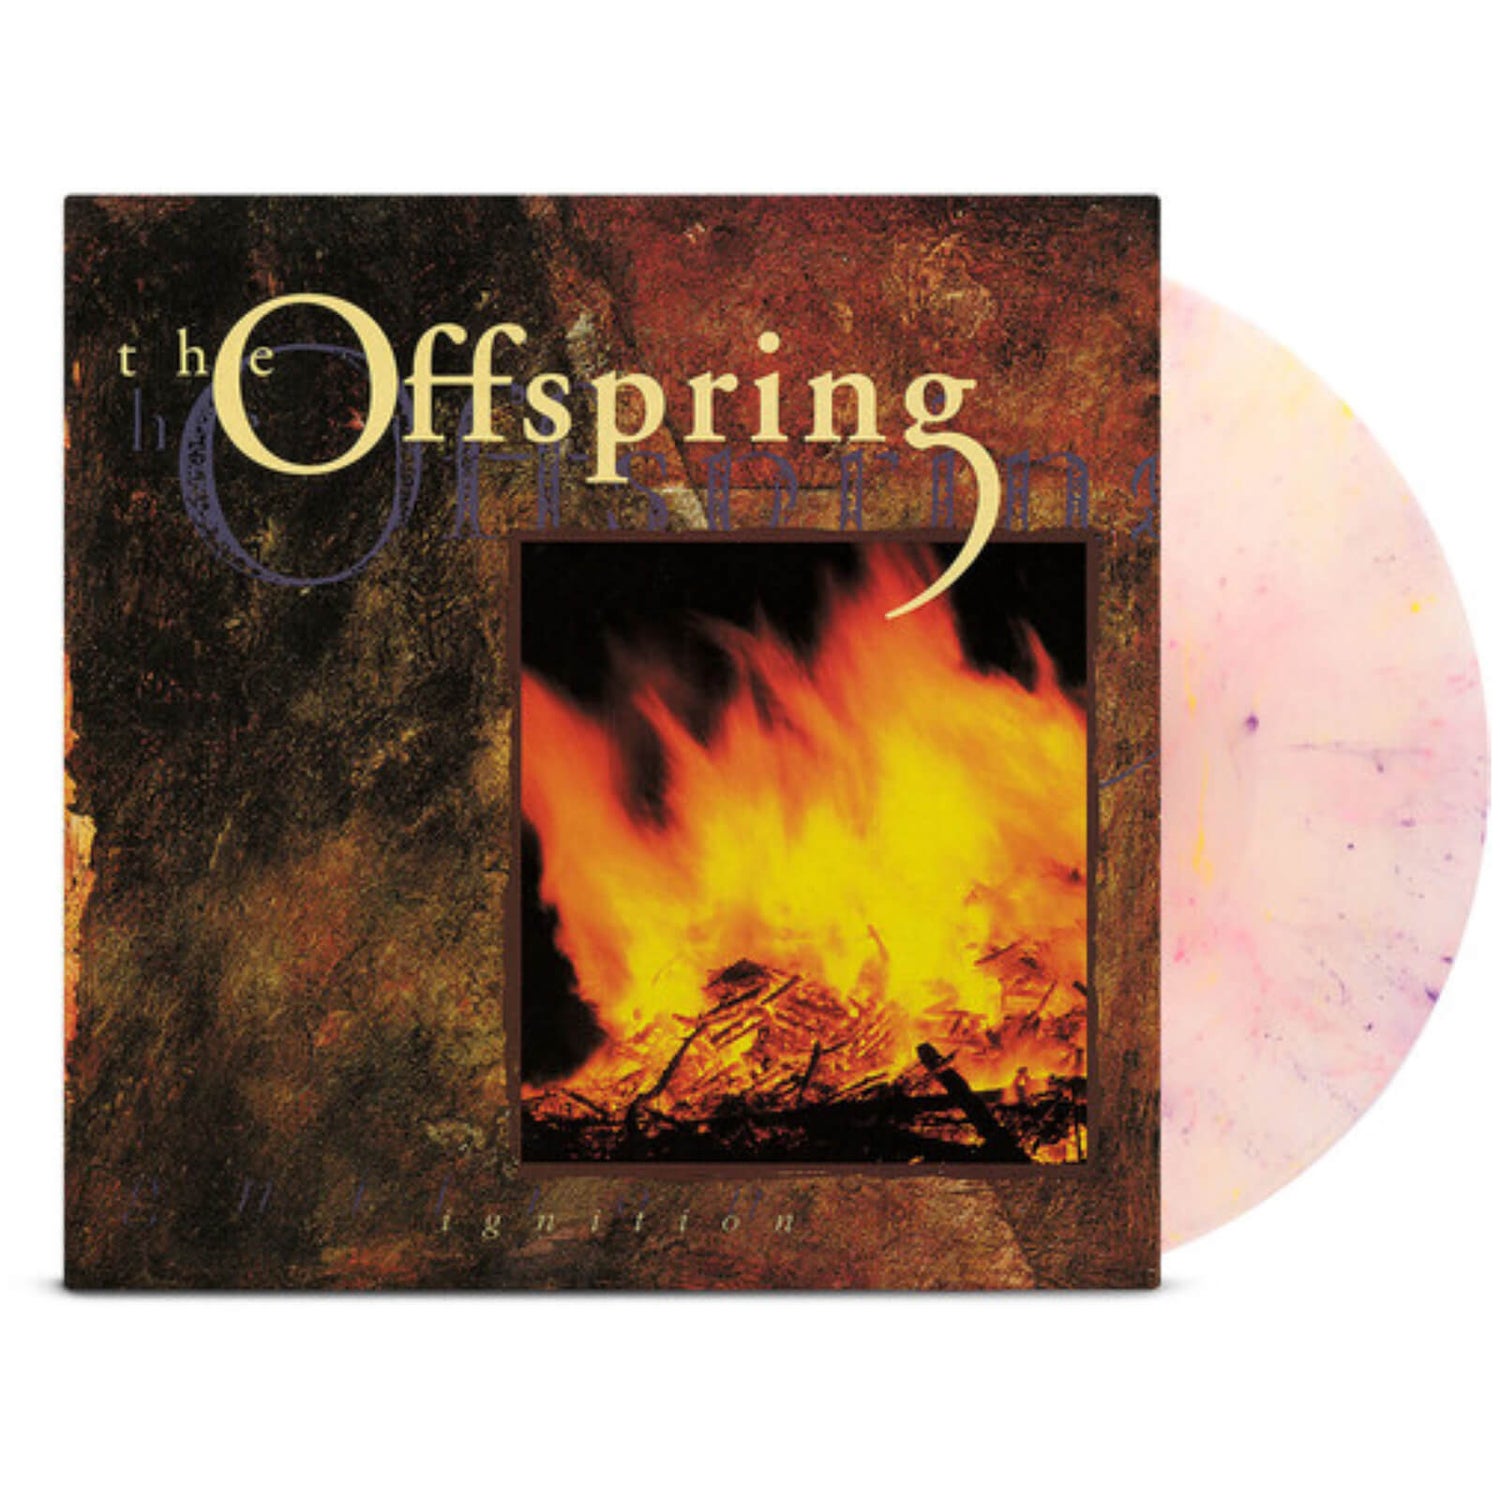 The Offspring - Ignition: 30th Anniversary Edition Vinyl (Yellow, Pink, And Clear)